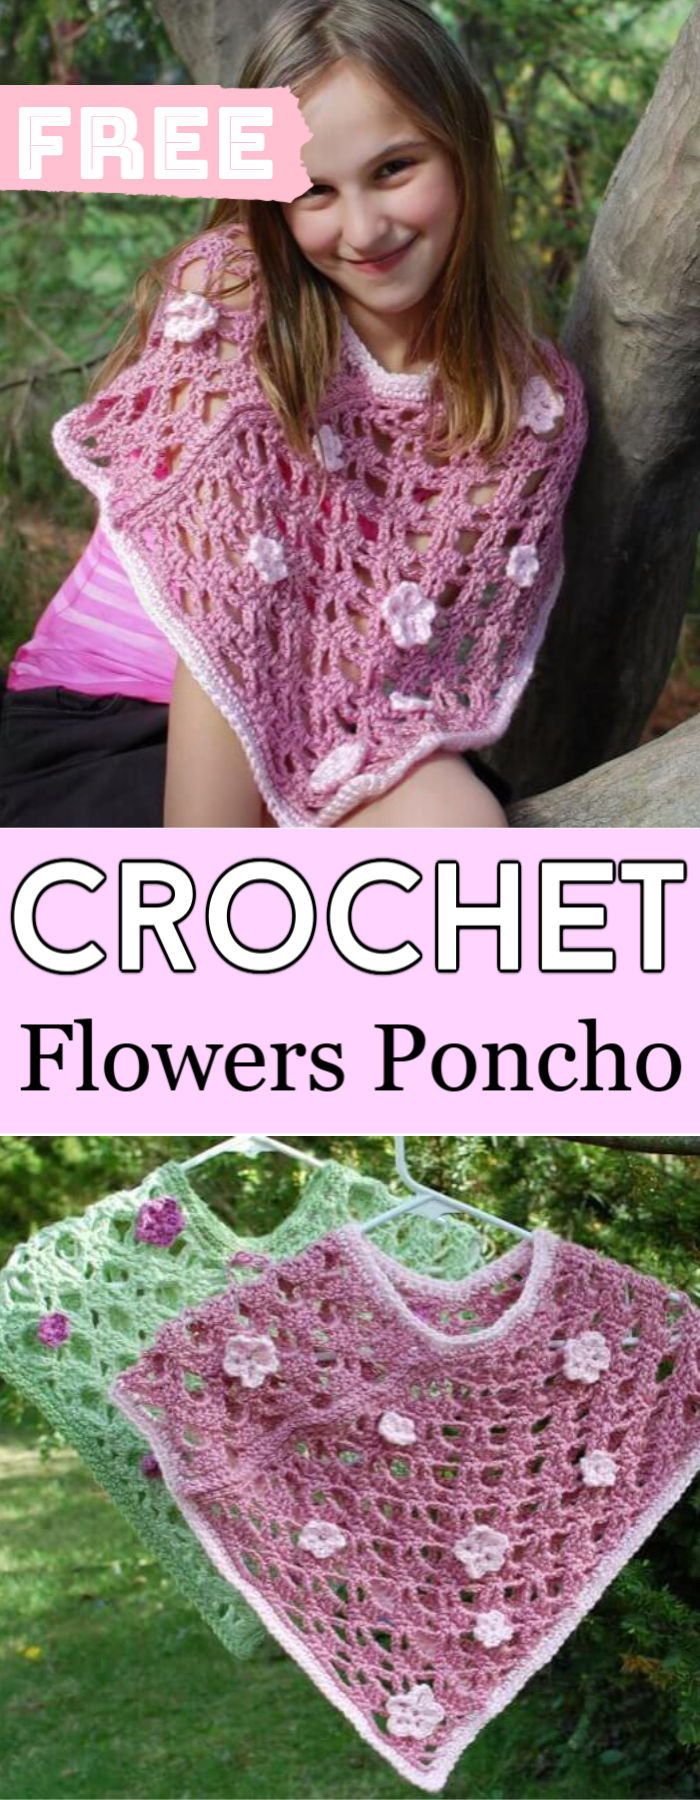 How to Crochet Spring Flowers Poncho Free Pattern